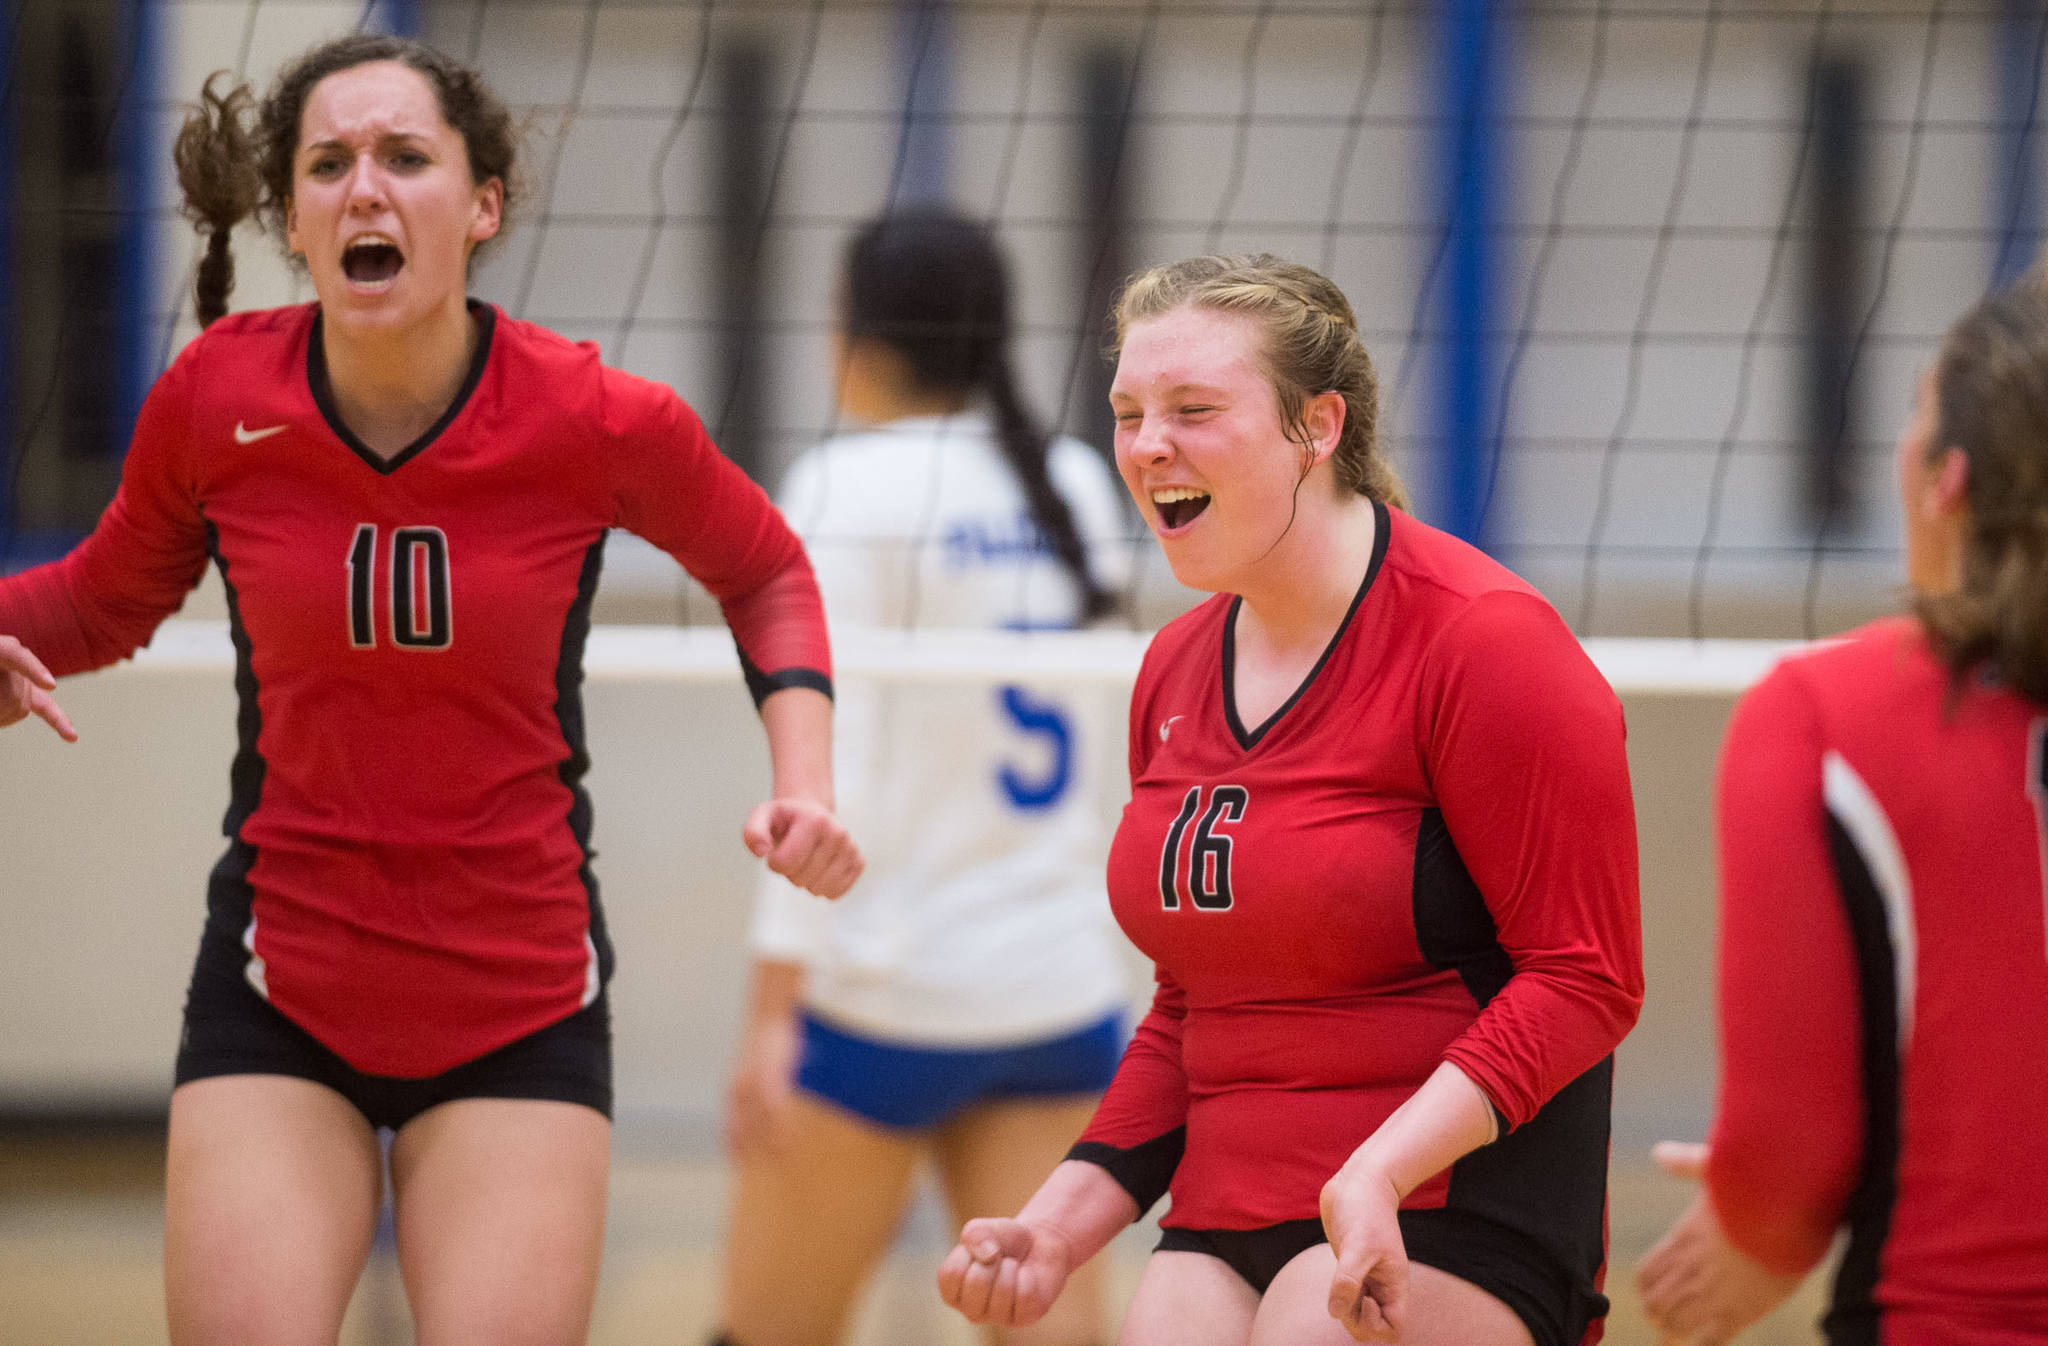 Juneau-Douglas’s Jessica Peirce, left, and Abby Meiners celebrate at point against Thunder Mountain at TMHS on Tuesday, Sept. 26, 2017. JDHS won 15-13 in the tiebreaking fifth game. (Michael Penn | Juneau Empire)